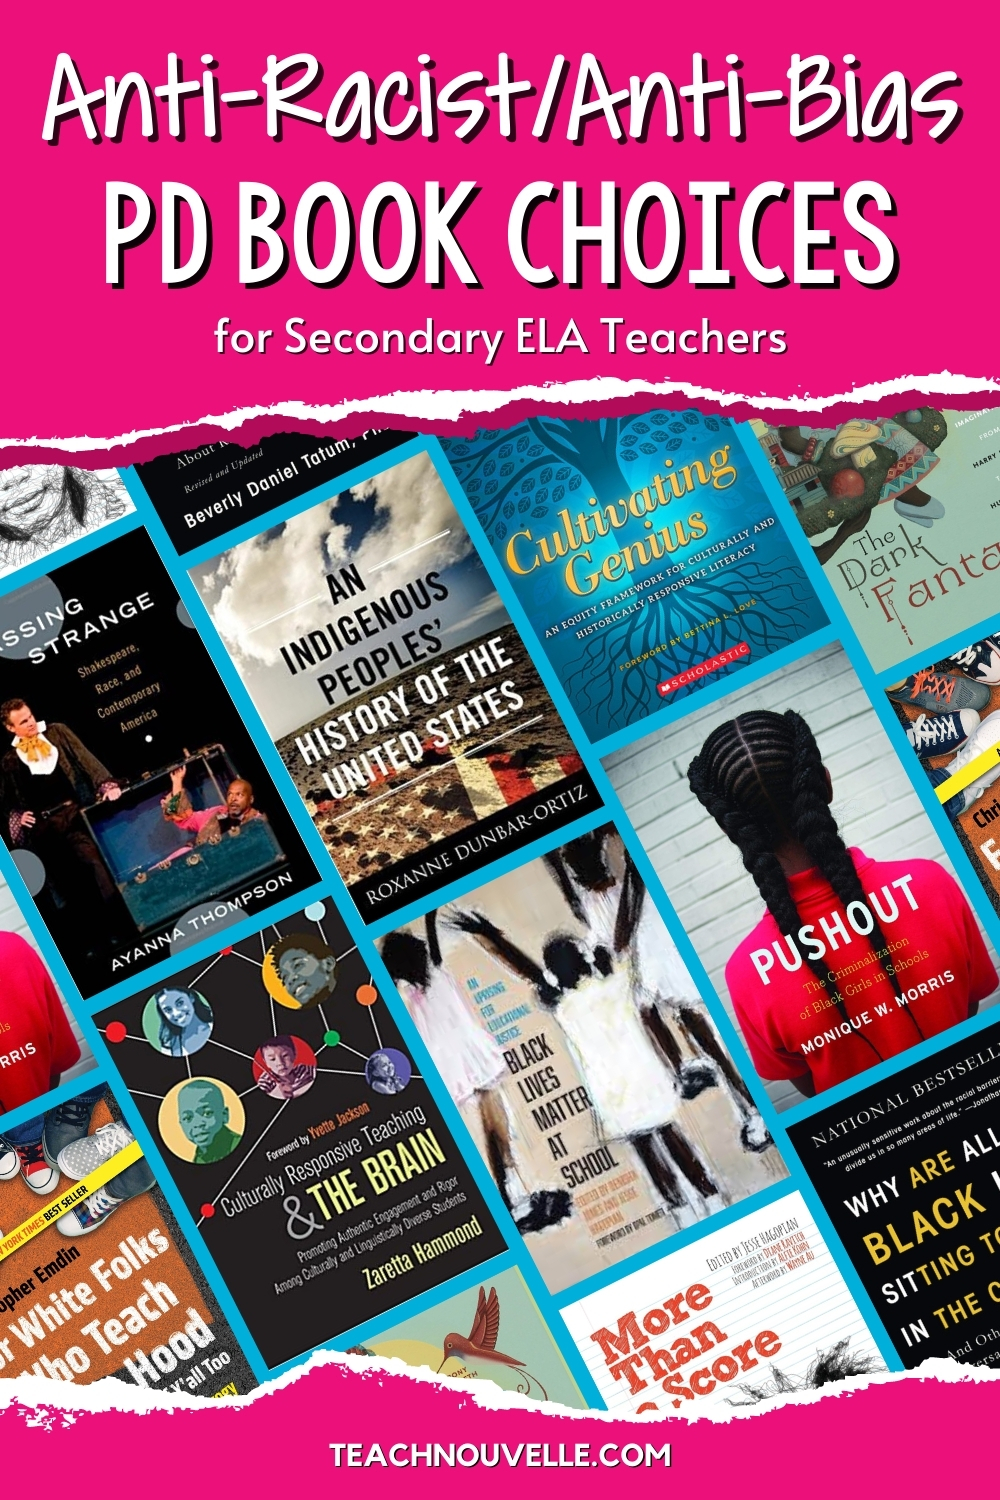 A background of many different book covers and a hot pink heading with the text "Anti-Racist/Anti-Bias PD Book Choices for Secondary ELA Teachers"